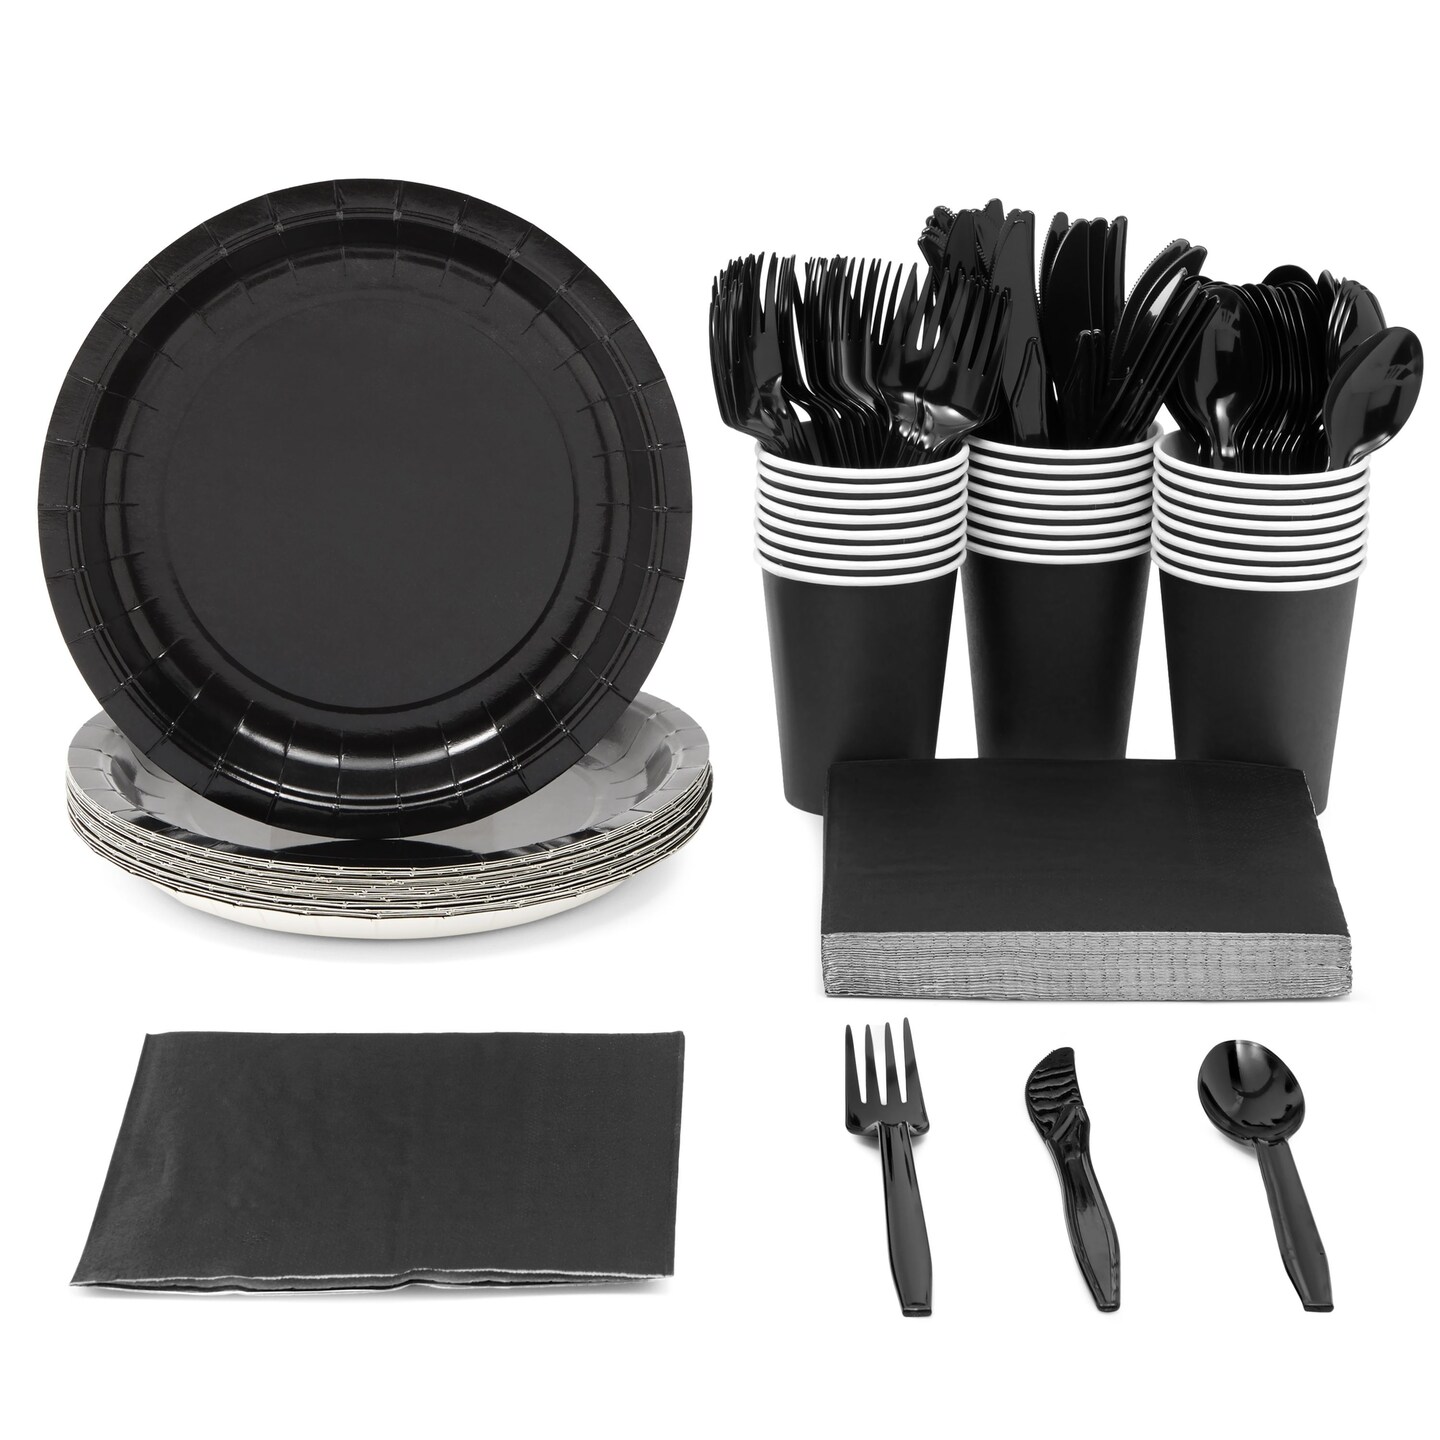 144 Piece Black Party Supplies - Serves 24 Disposable Paper Plates, Napkins, Cups, and Cutlery for Birthday, Graduation Party Table Decorations